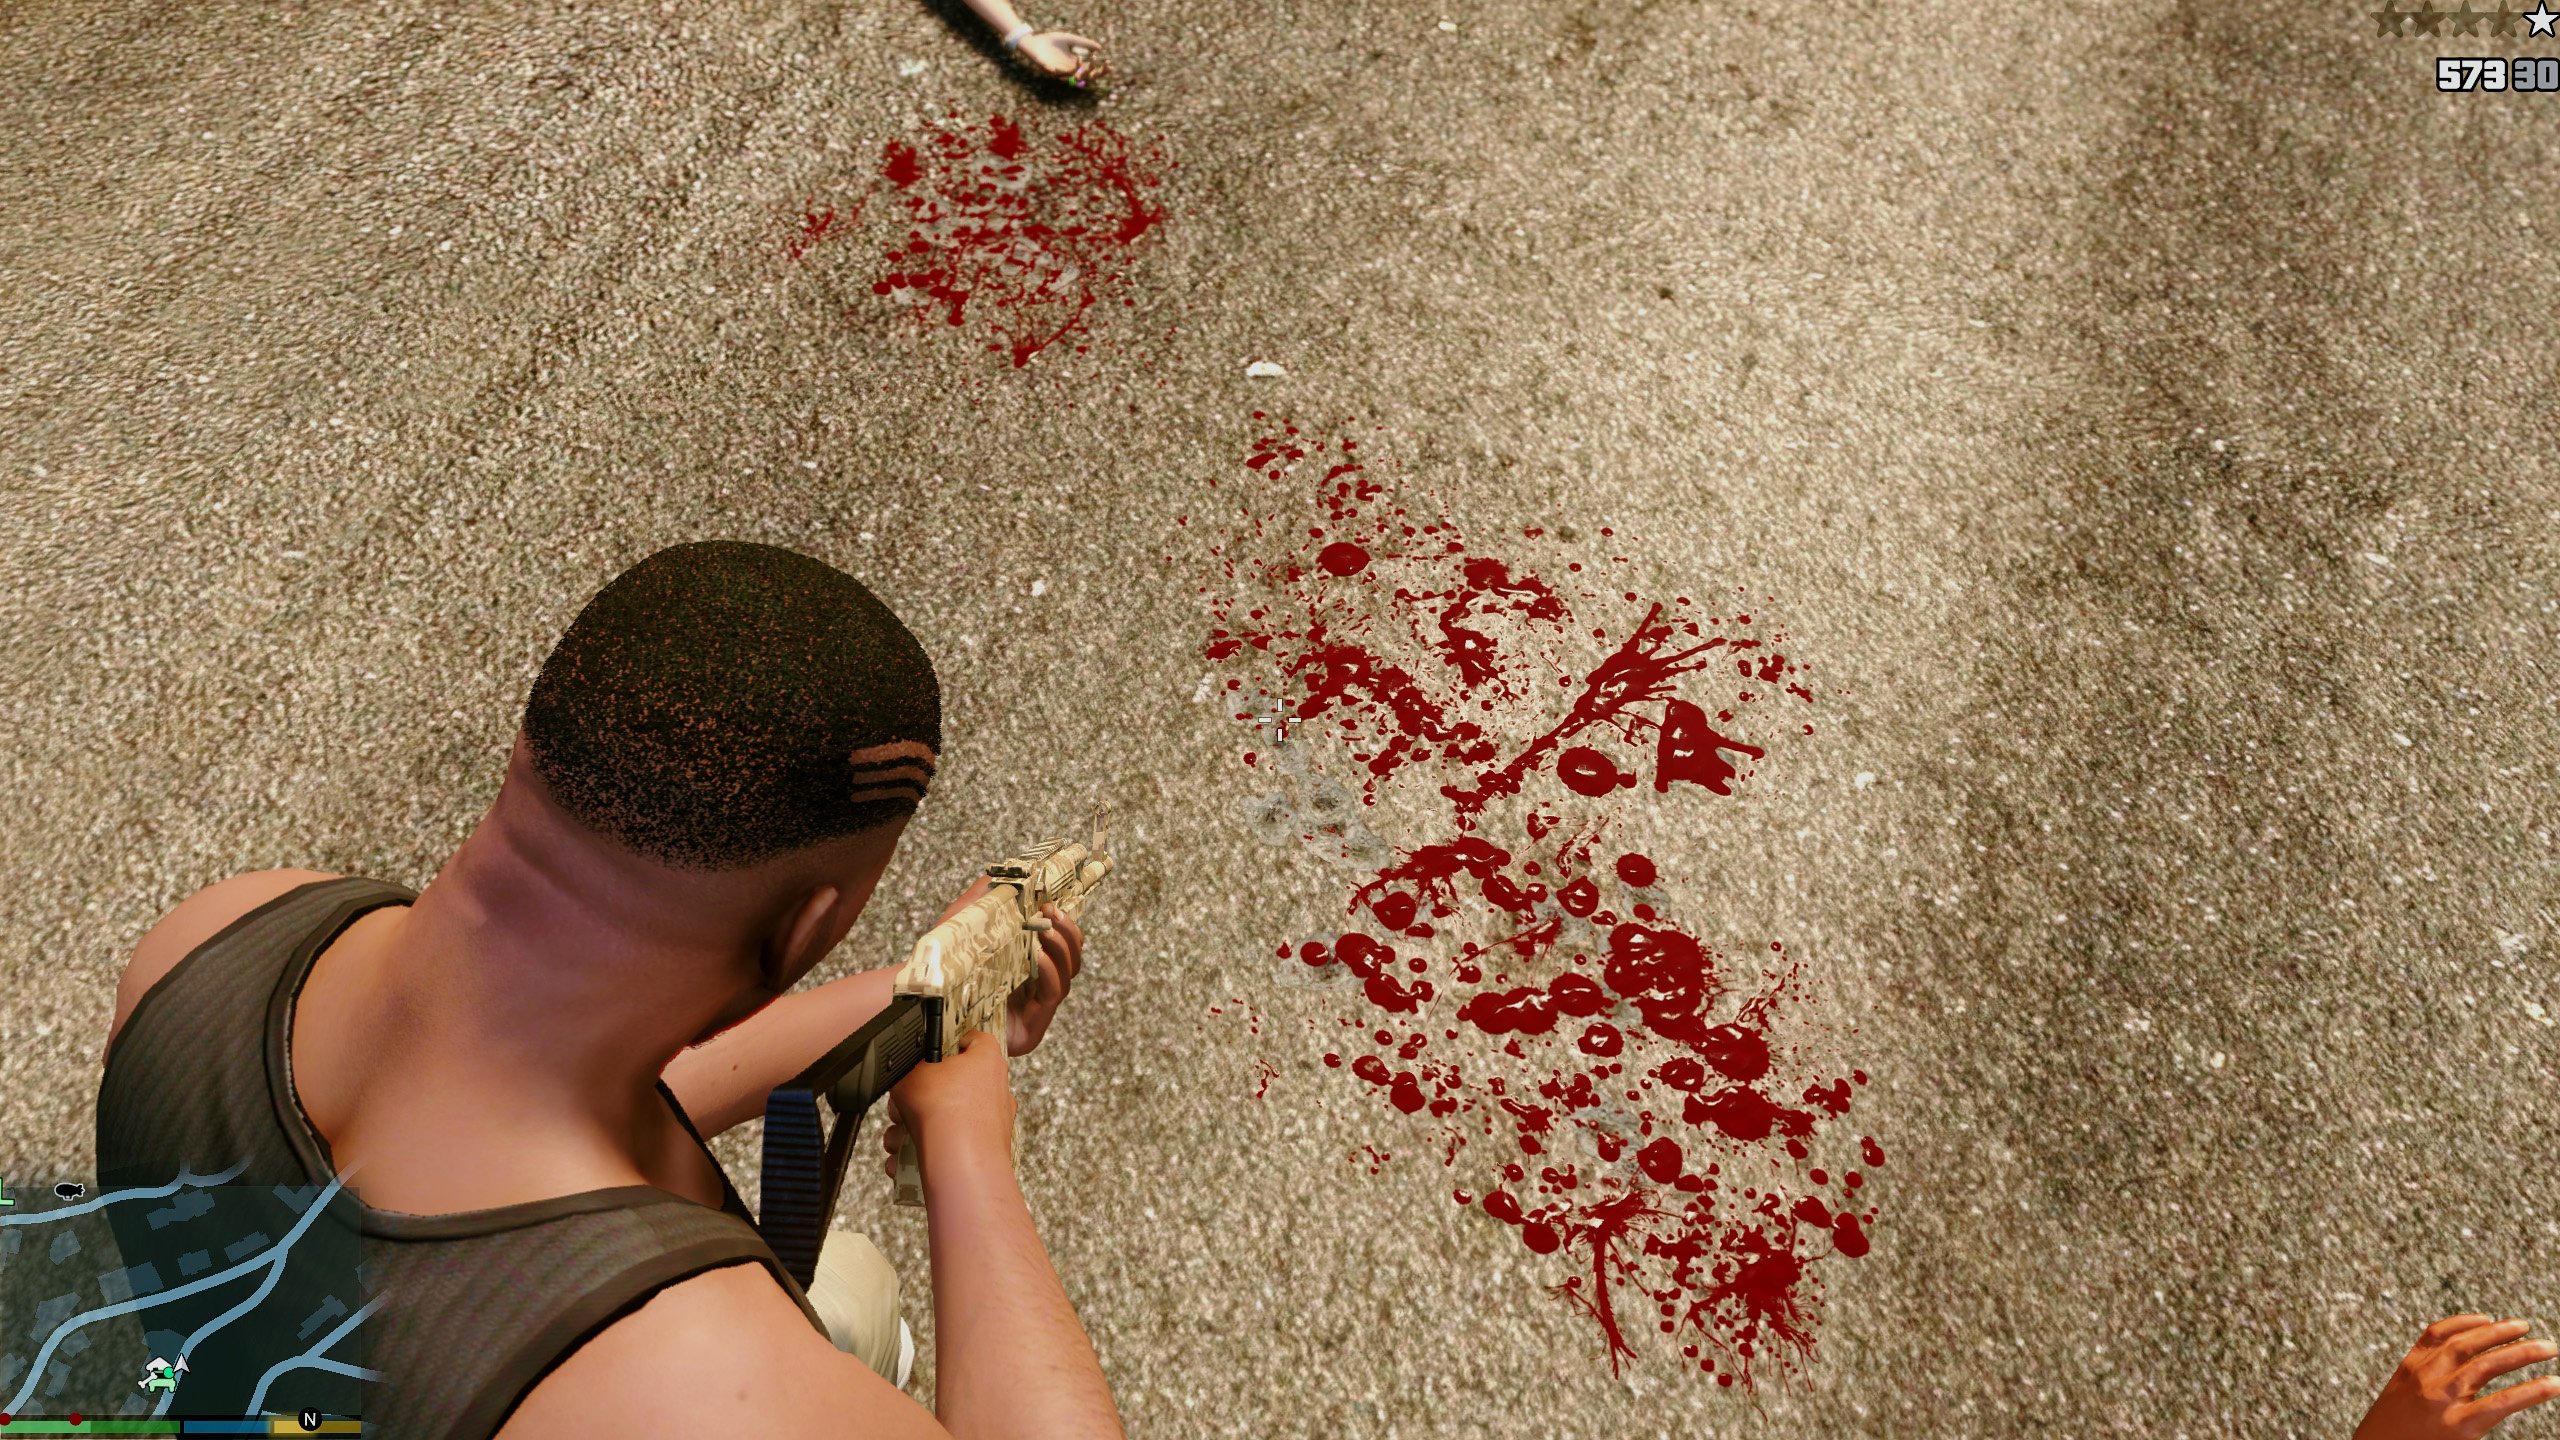 Gore and blood gta 5 фото 35